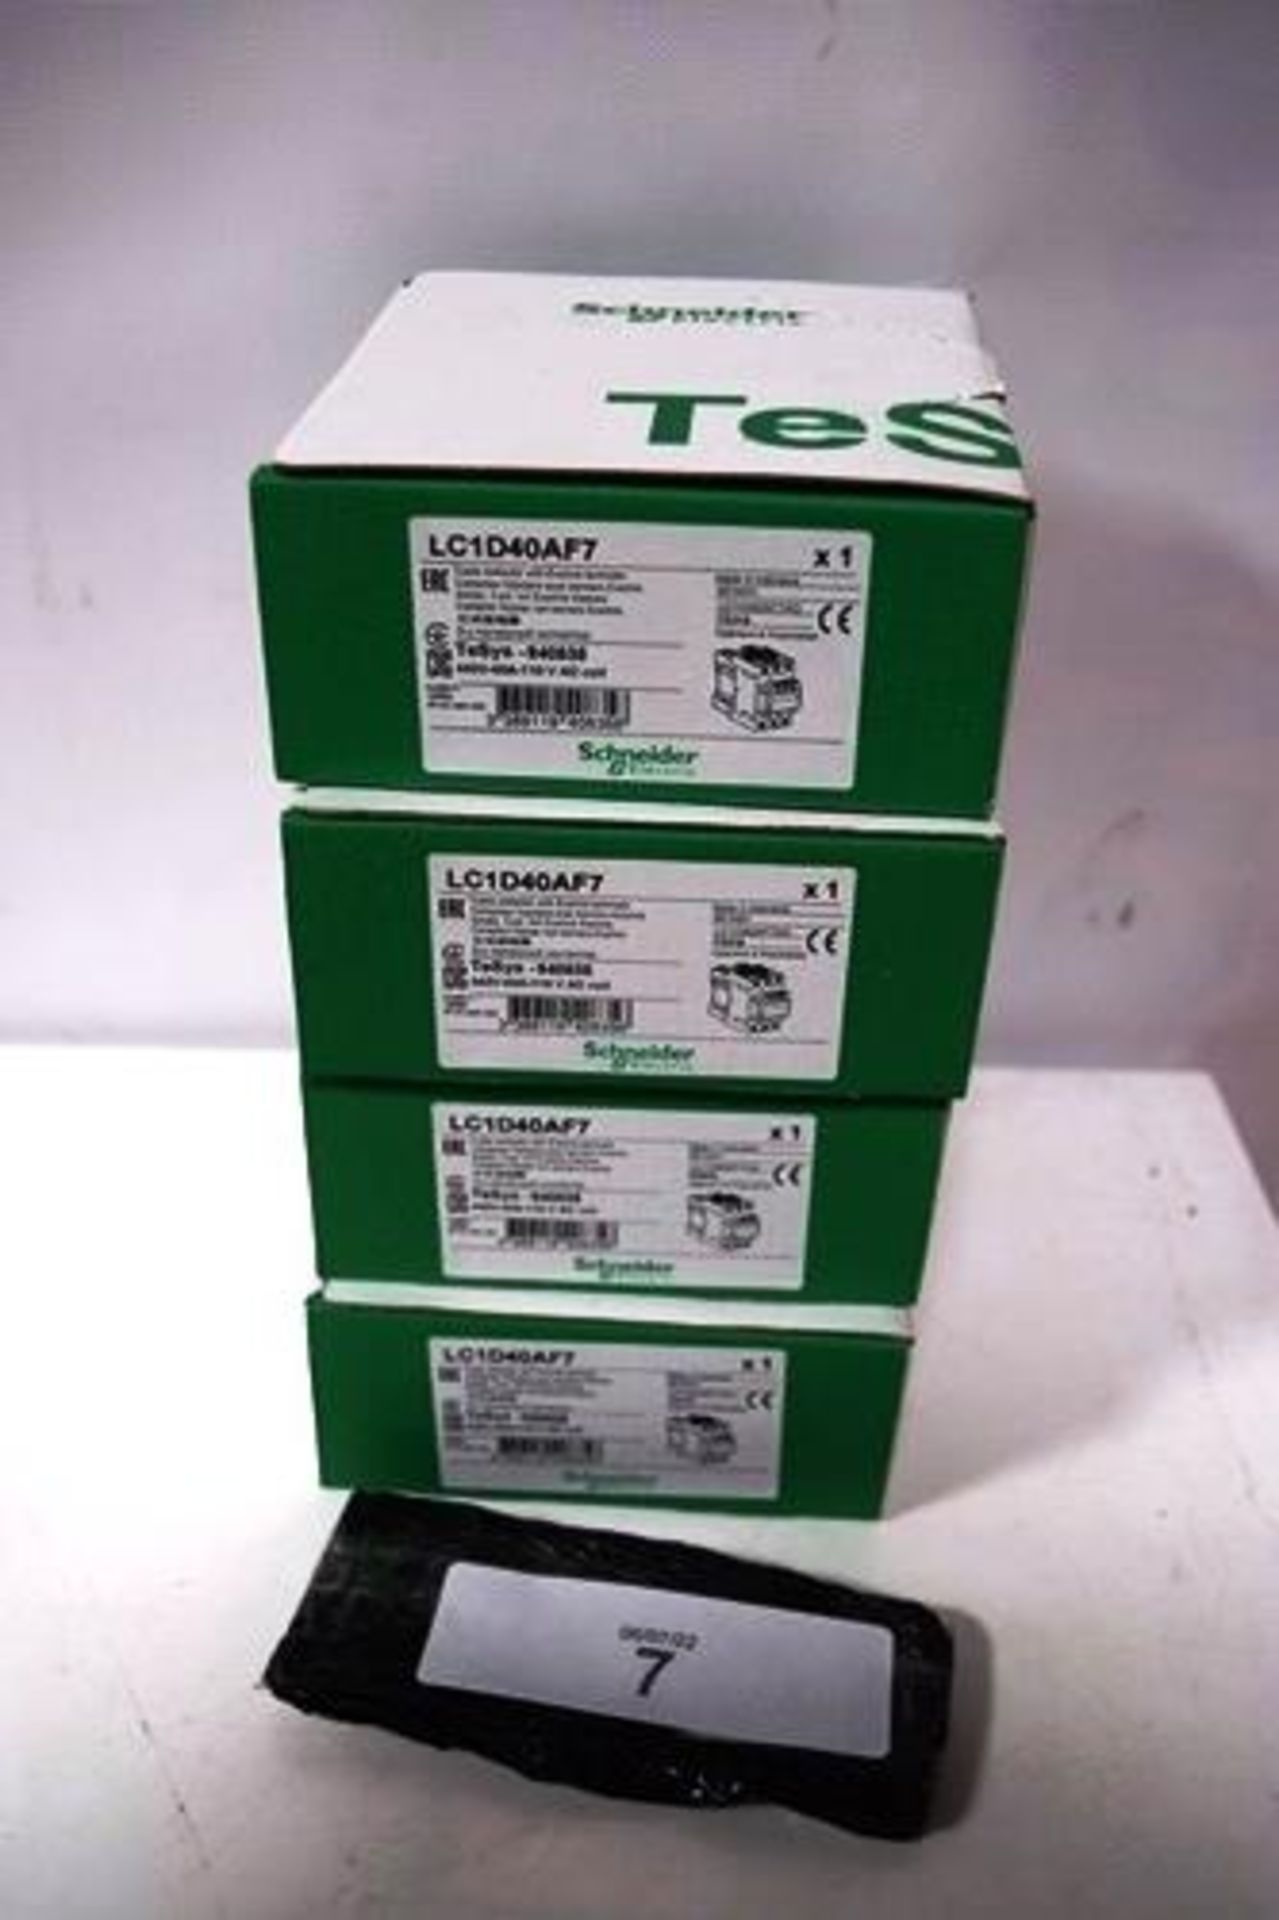 4 x Schneider 3 pole contactor with Everlink terminals, model LC1D40AF7 - New in box (SW9)